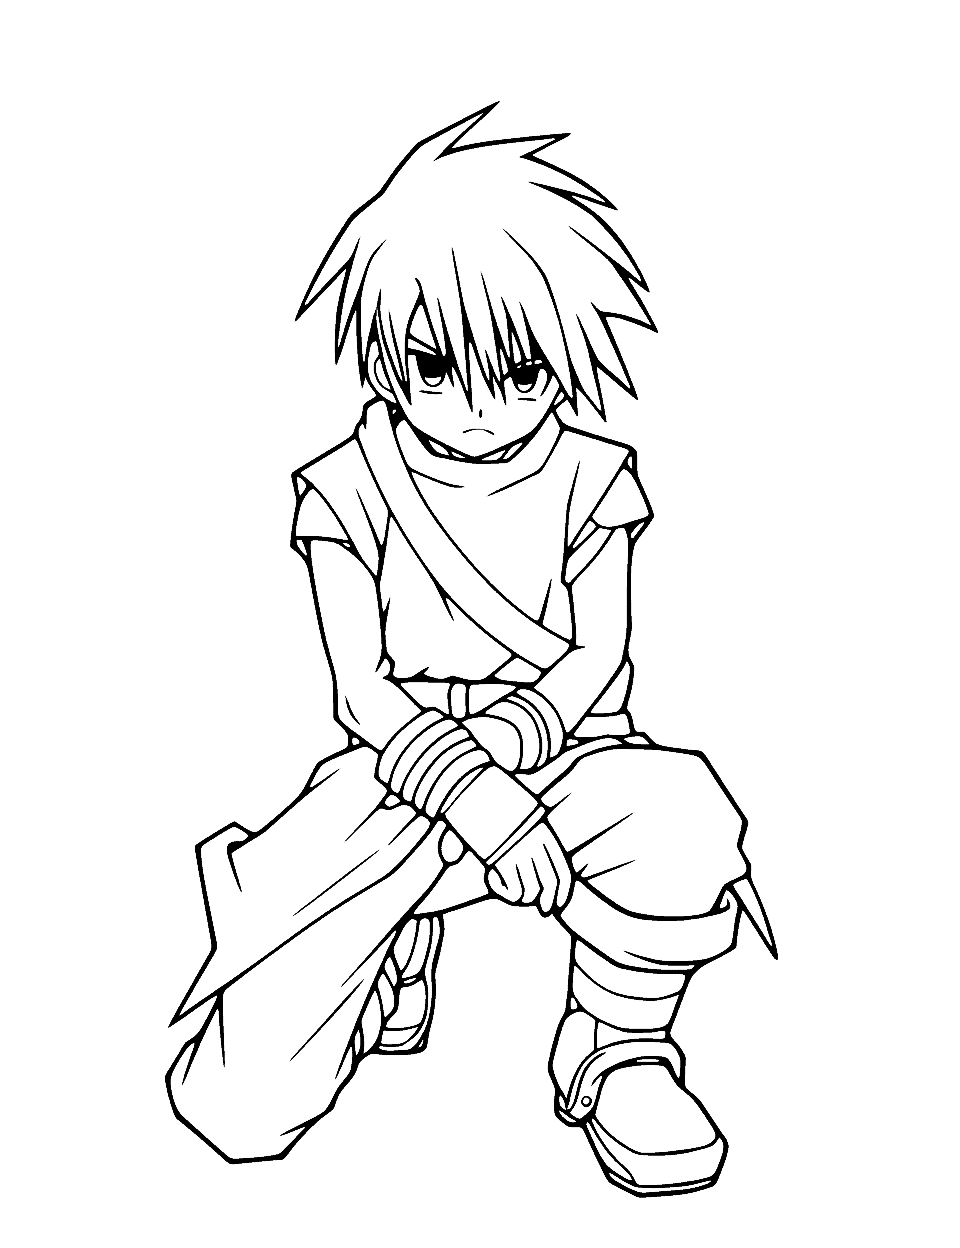 Sad Anime Warrior Coloring Page - A sad anime warrior, expressing his sorrow after a tough battle.